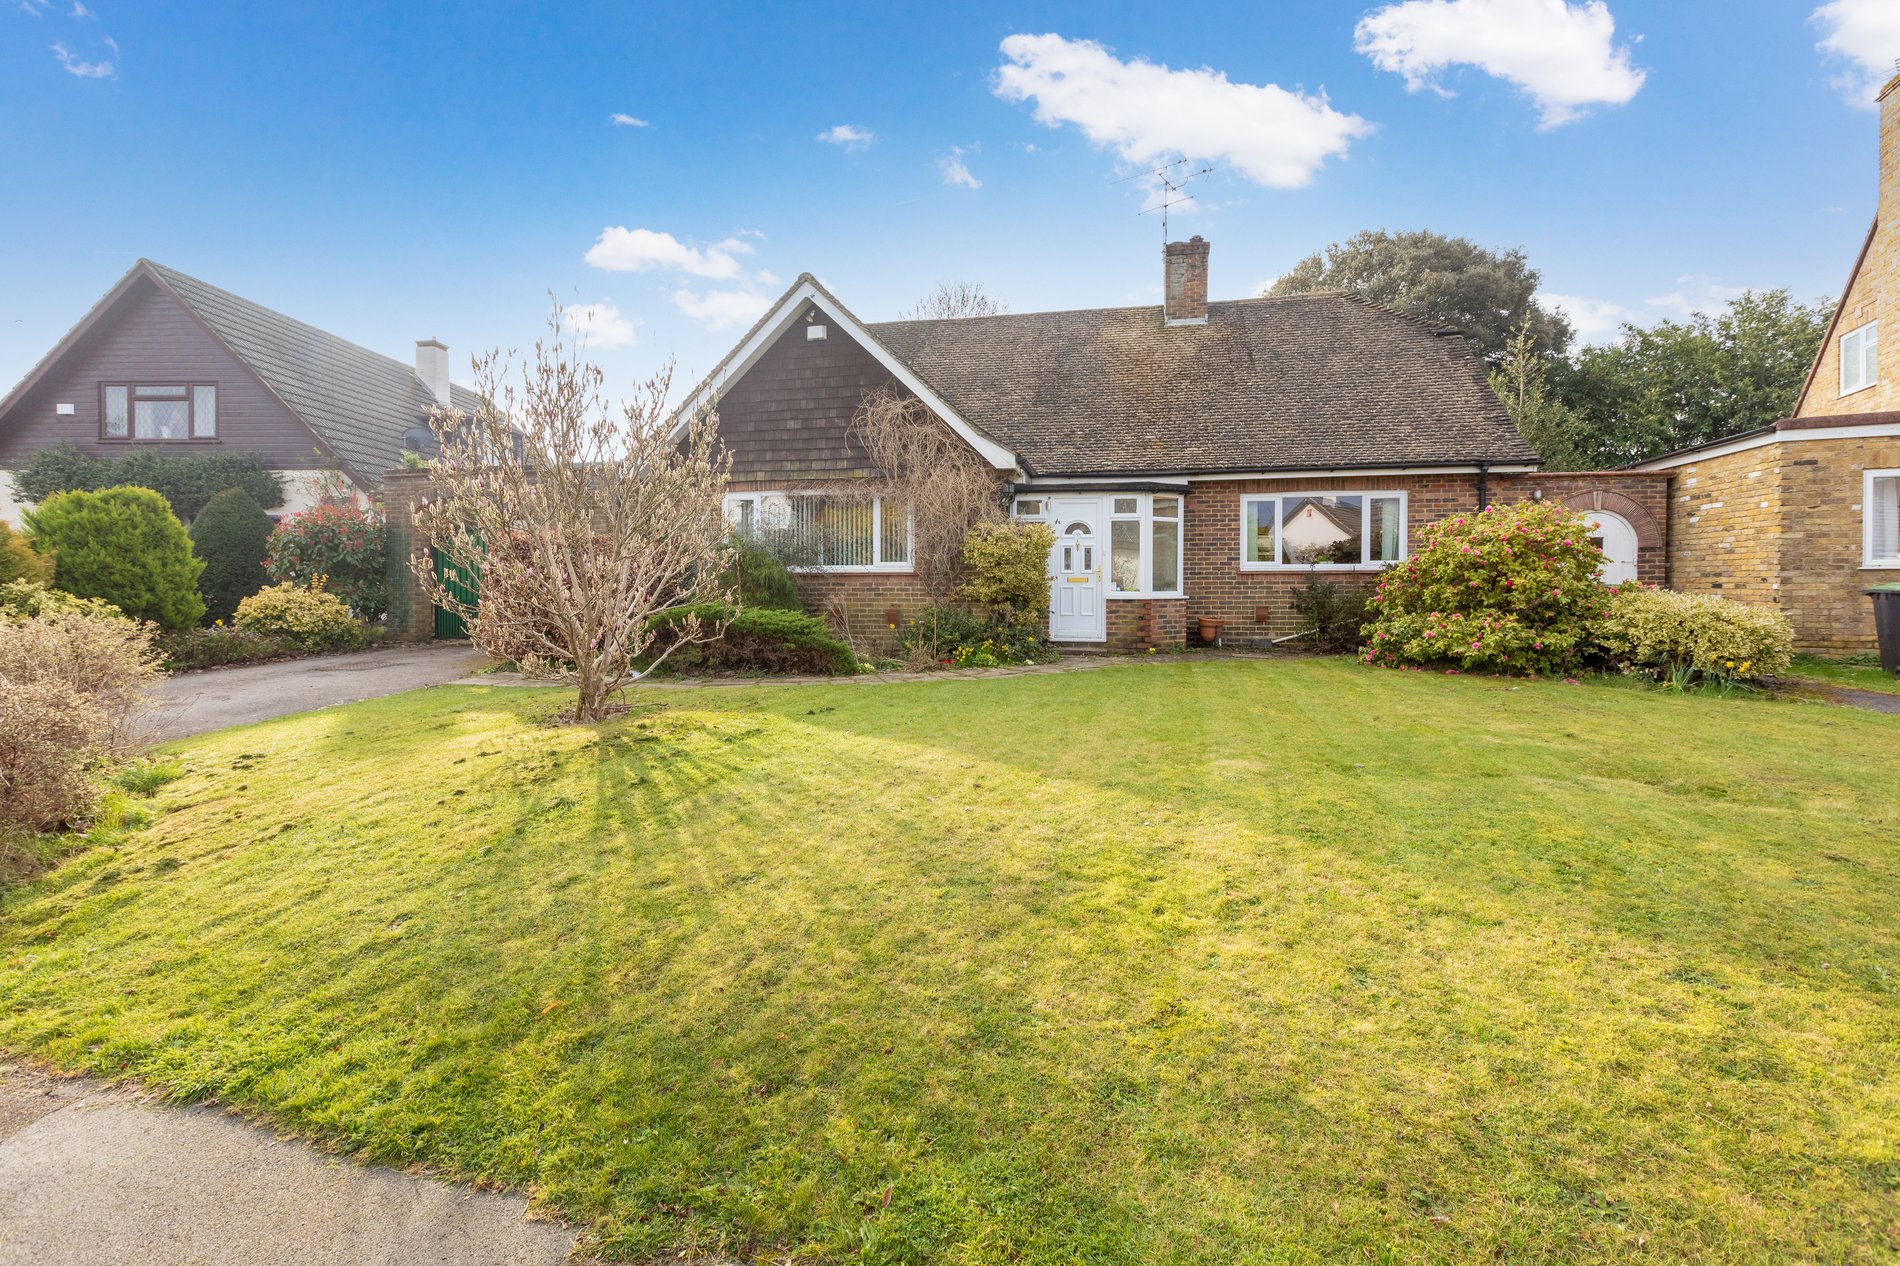 4 bed detached house for sale in The Fairway, Burnham  - Property Image 1